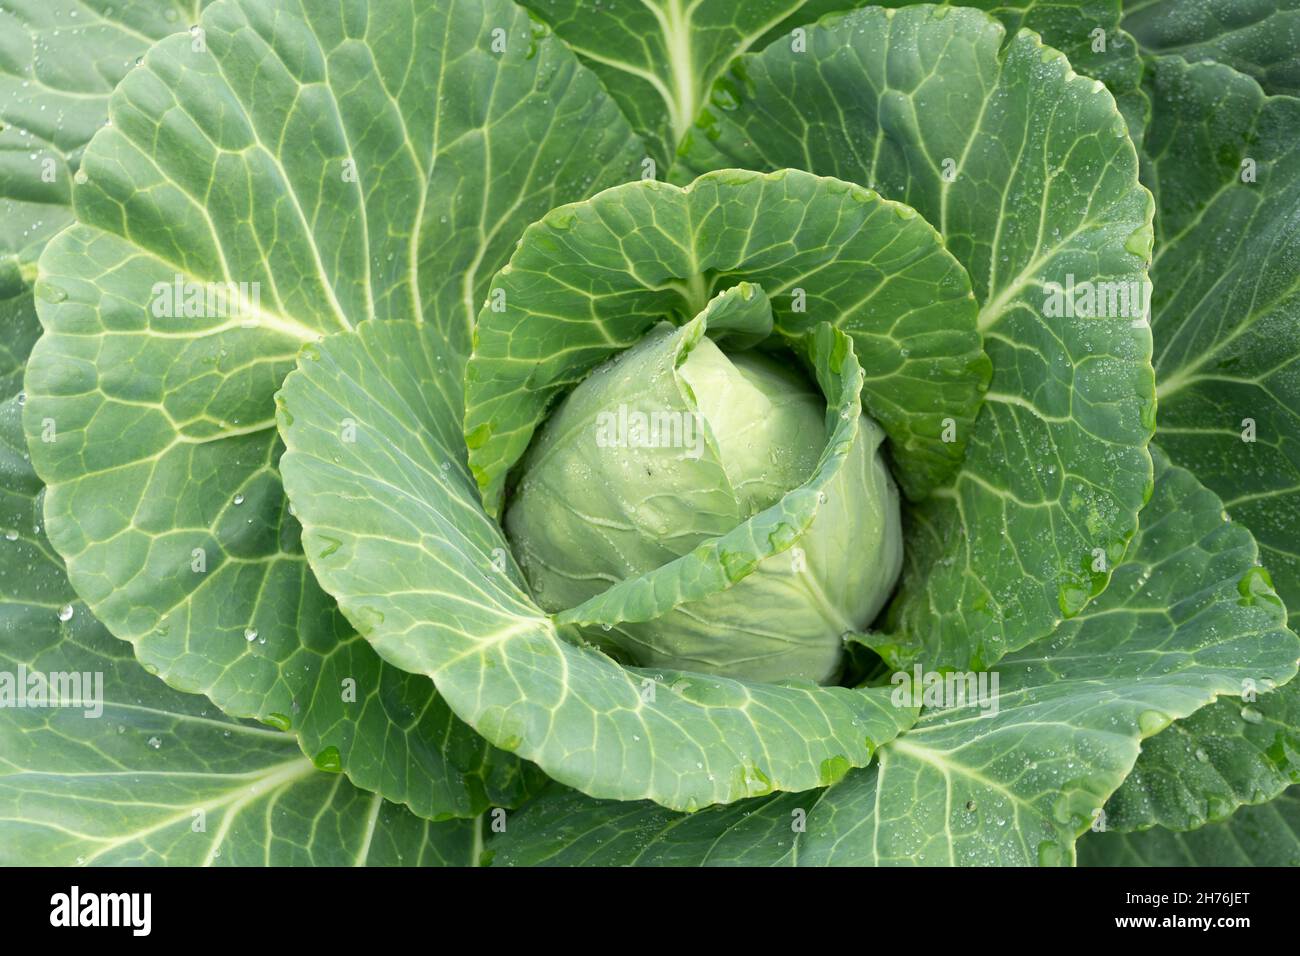 The cone-shaped head of early Tochka cabbage is ripe in a garden bed. Stock Photo